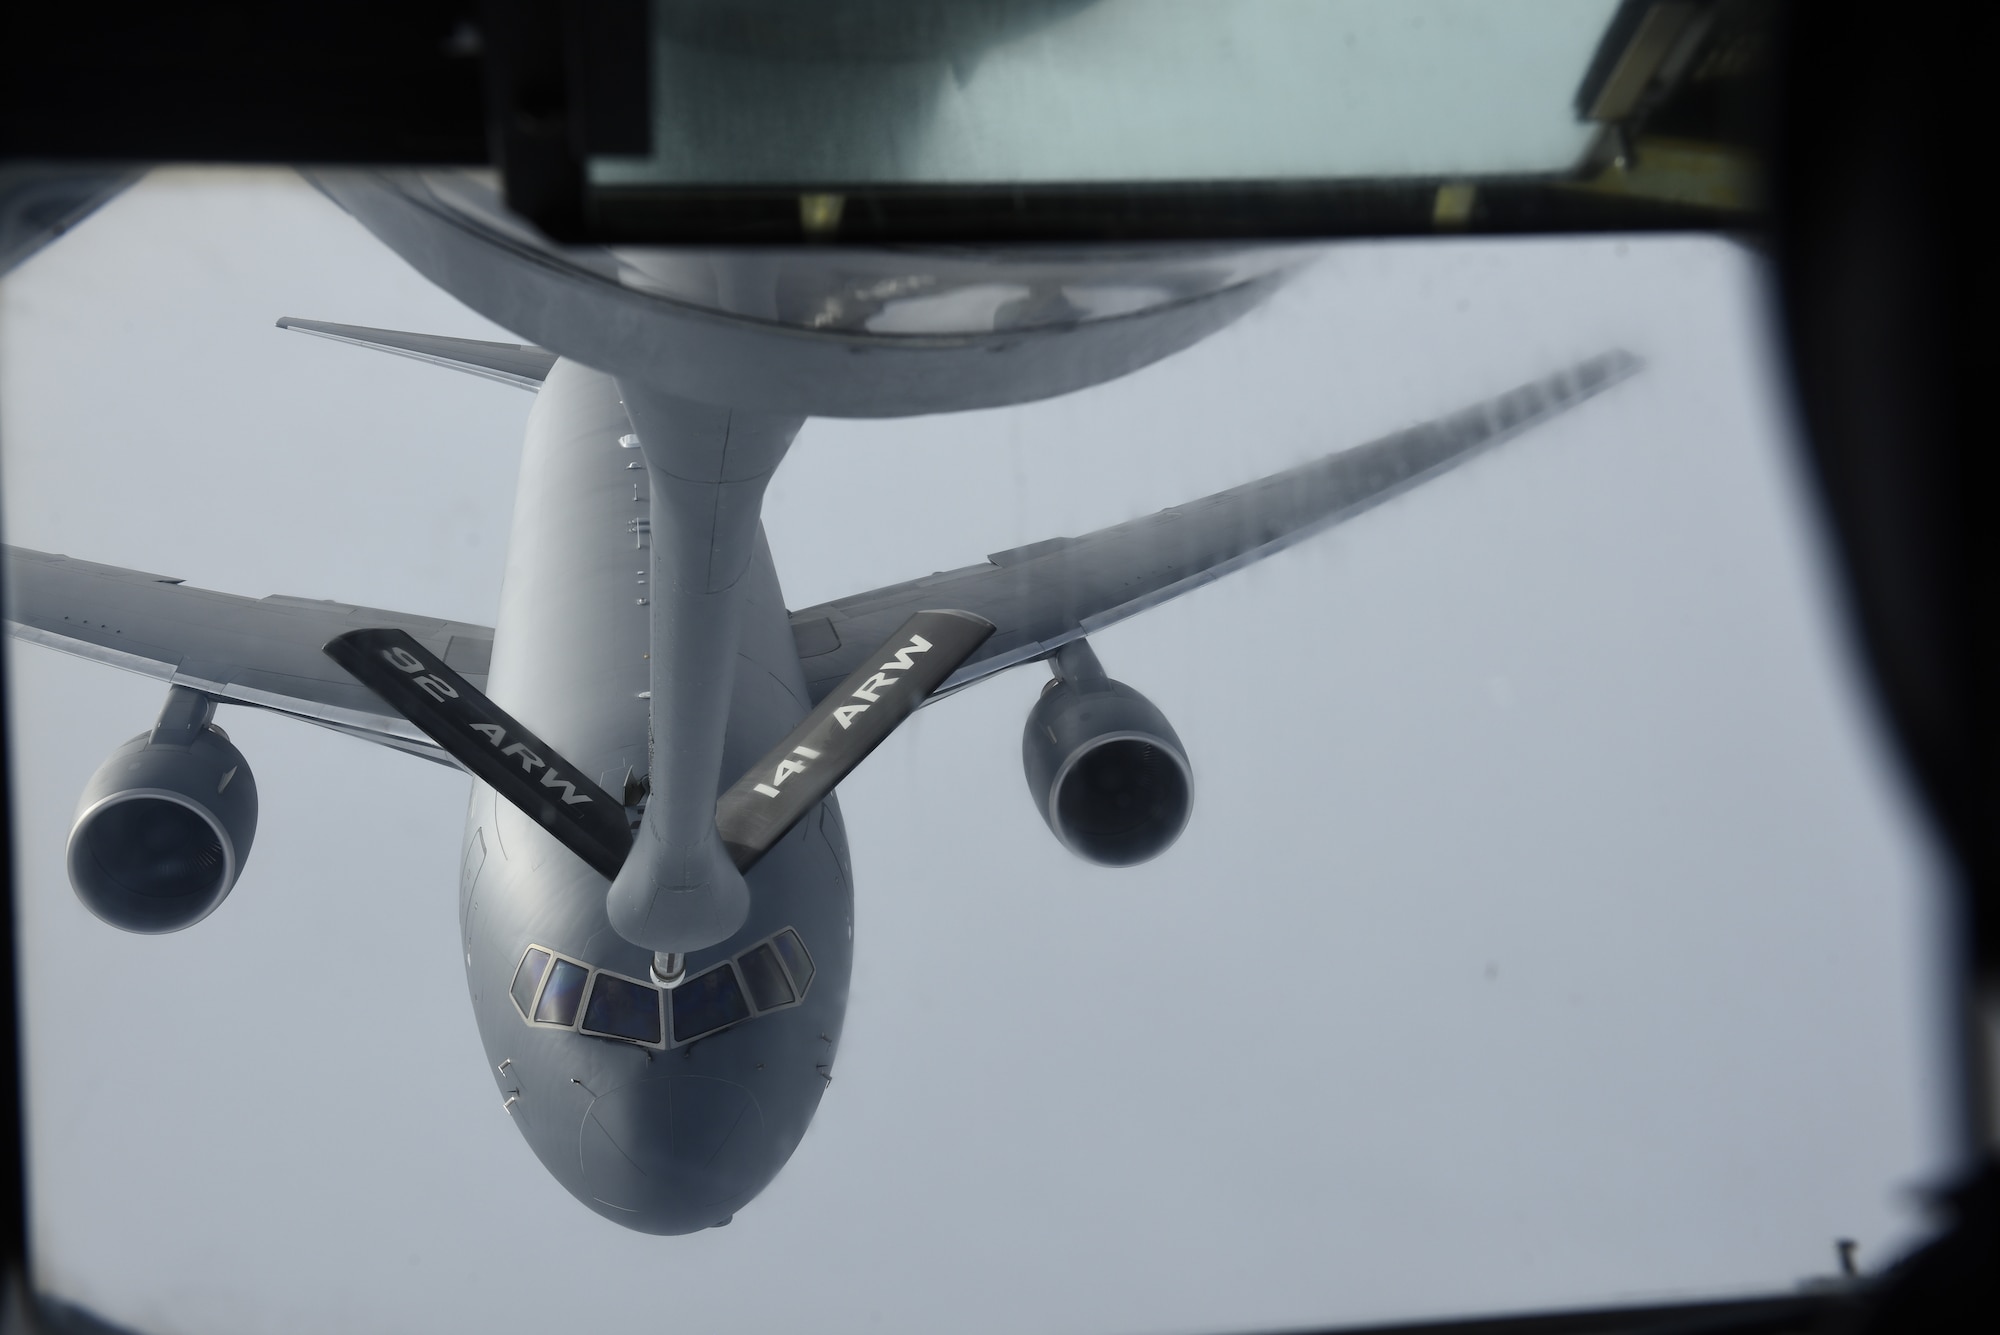 The crew of a new KC-46 Pegasus aerial-refueling aircraft practice making refueling hose connections with a KC-135 Stratotanker over Washington, January 22, 2019. Team Fairchild's 384th Air Refueling Squadron was the first to train with the newly-produced aircraft to train pilots and boom operators to work with the new refueling aircraft. (U.S. Air Force photo/Airman 1st Class Lawrence Sena)